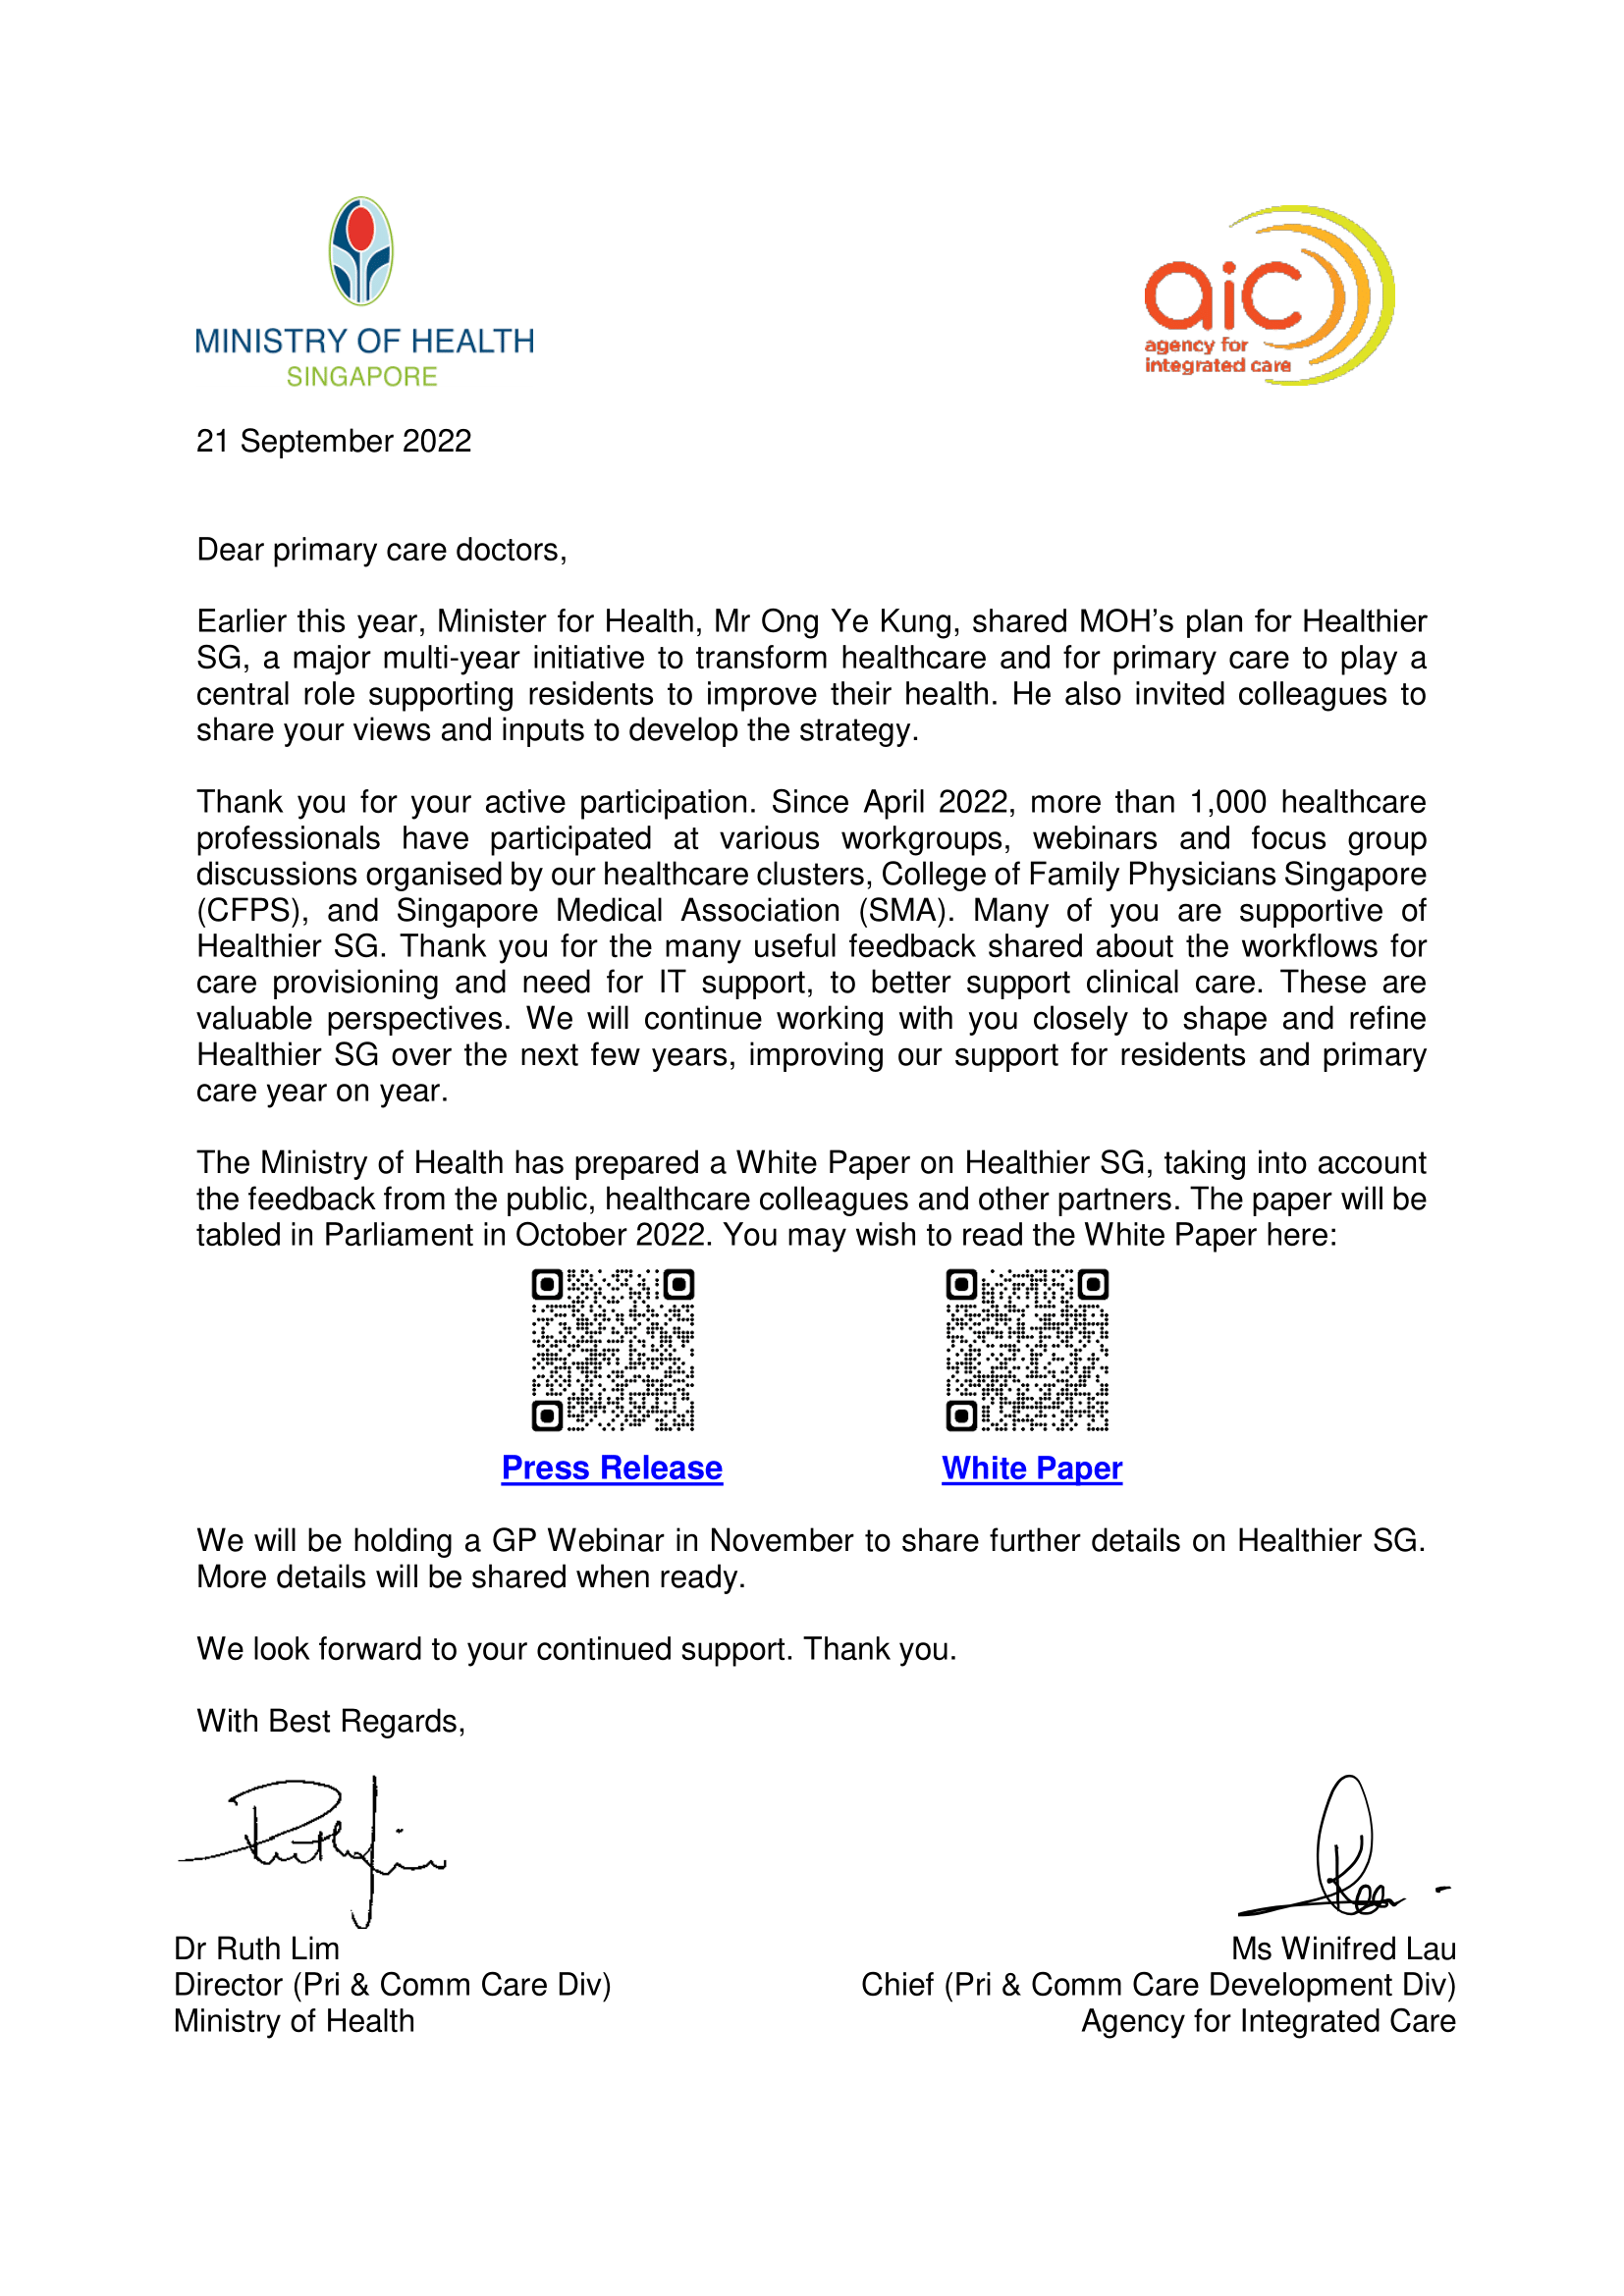 Letter to GPs on WP for Healthier SG (21 Sep 2022)-1.png